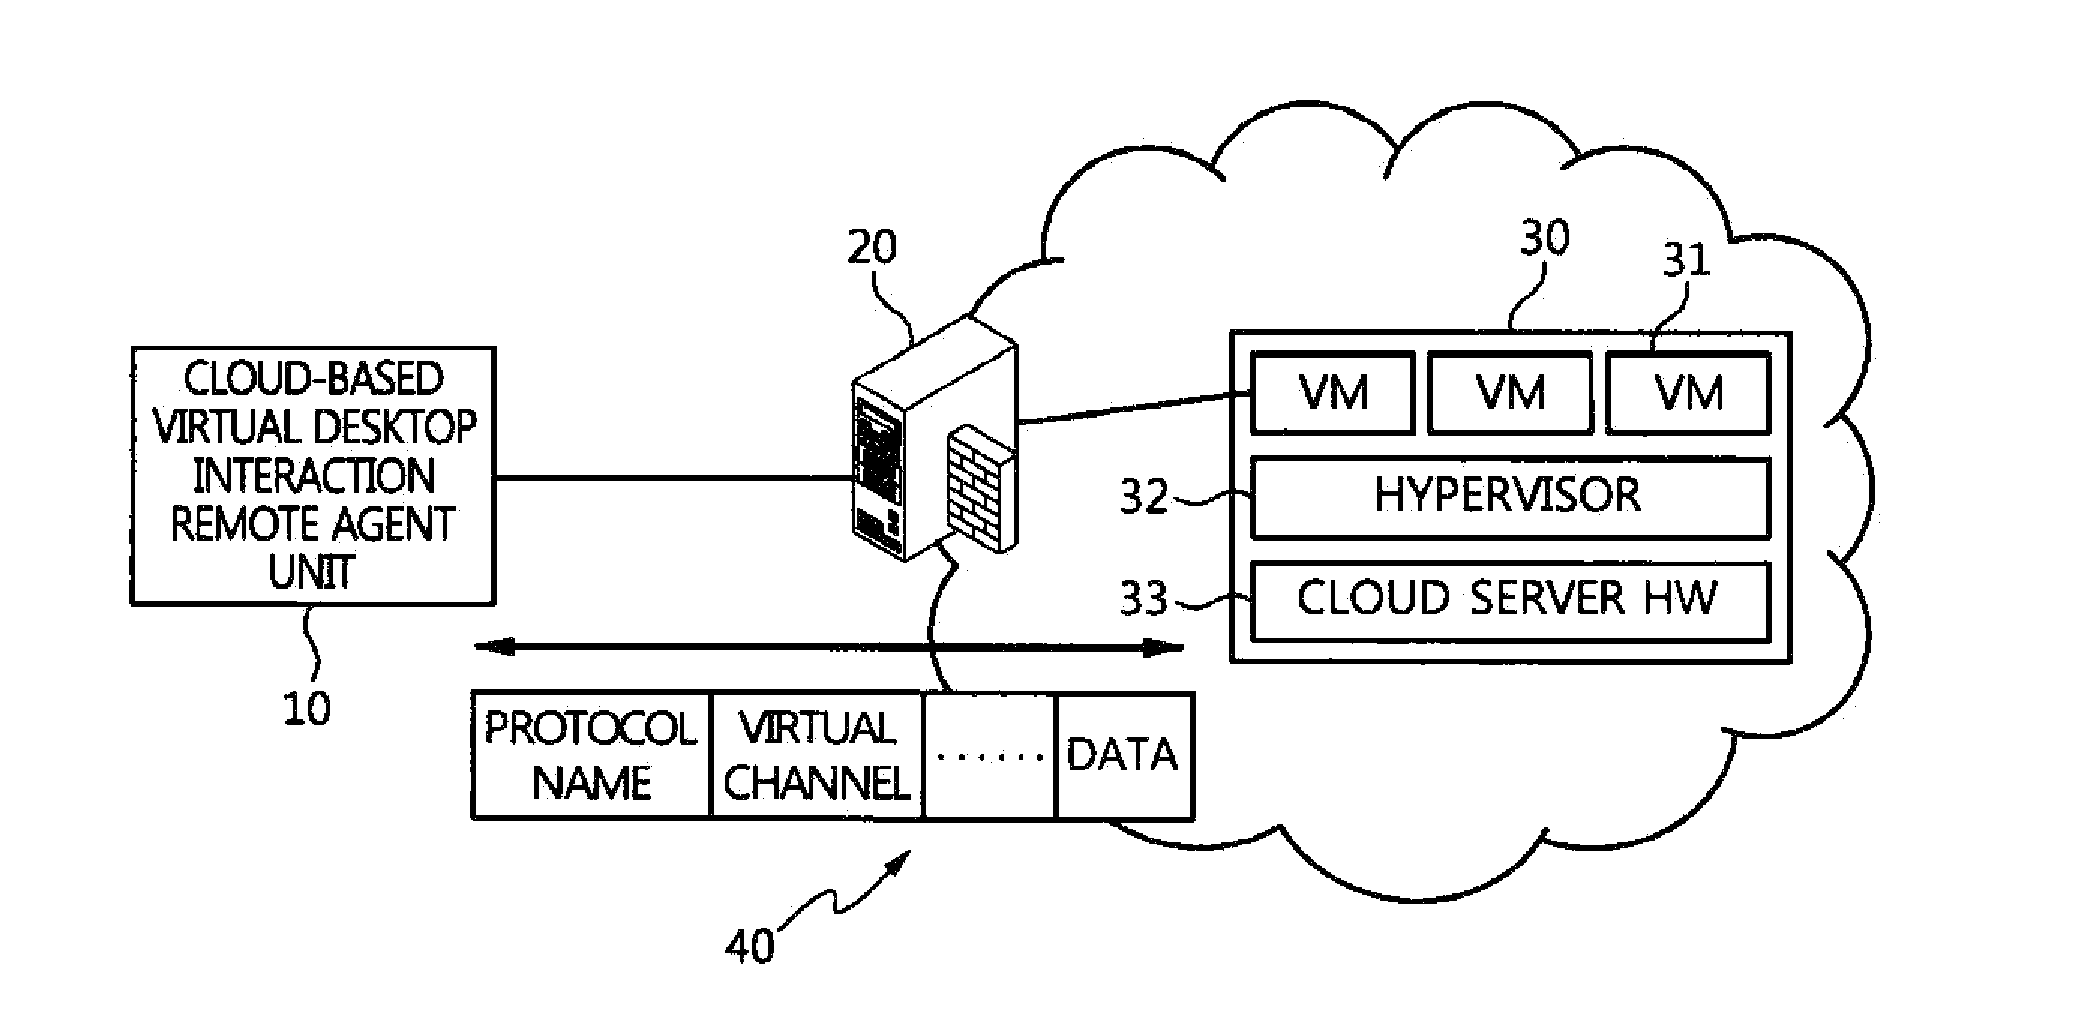 Security control apparatus and method for cloud-based virtual desktop